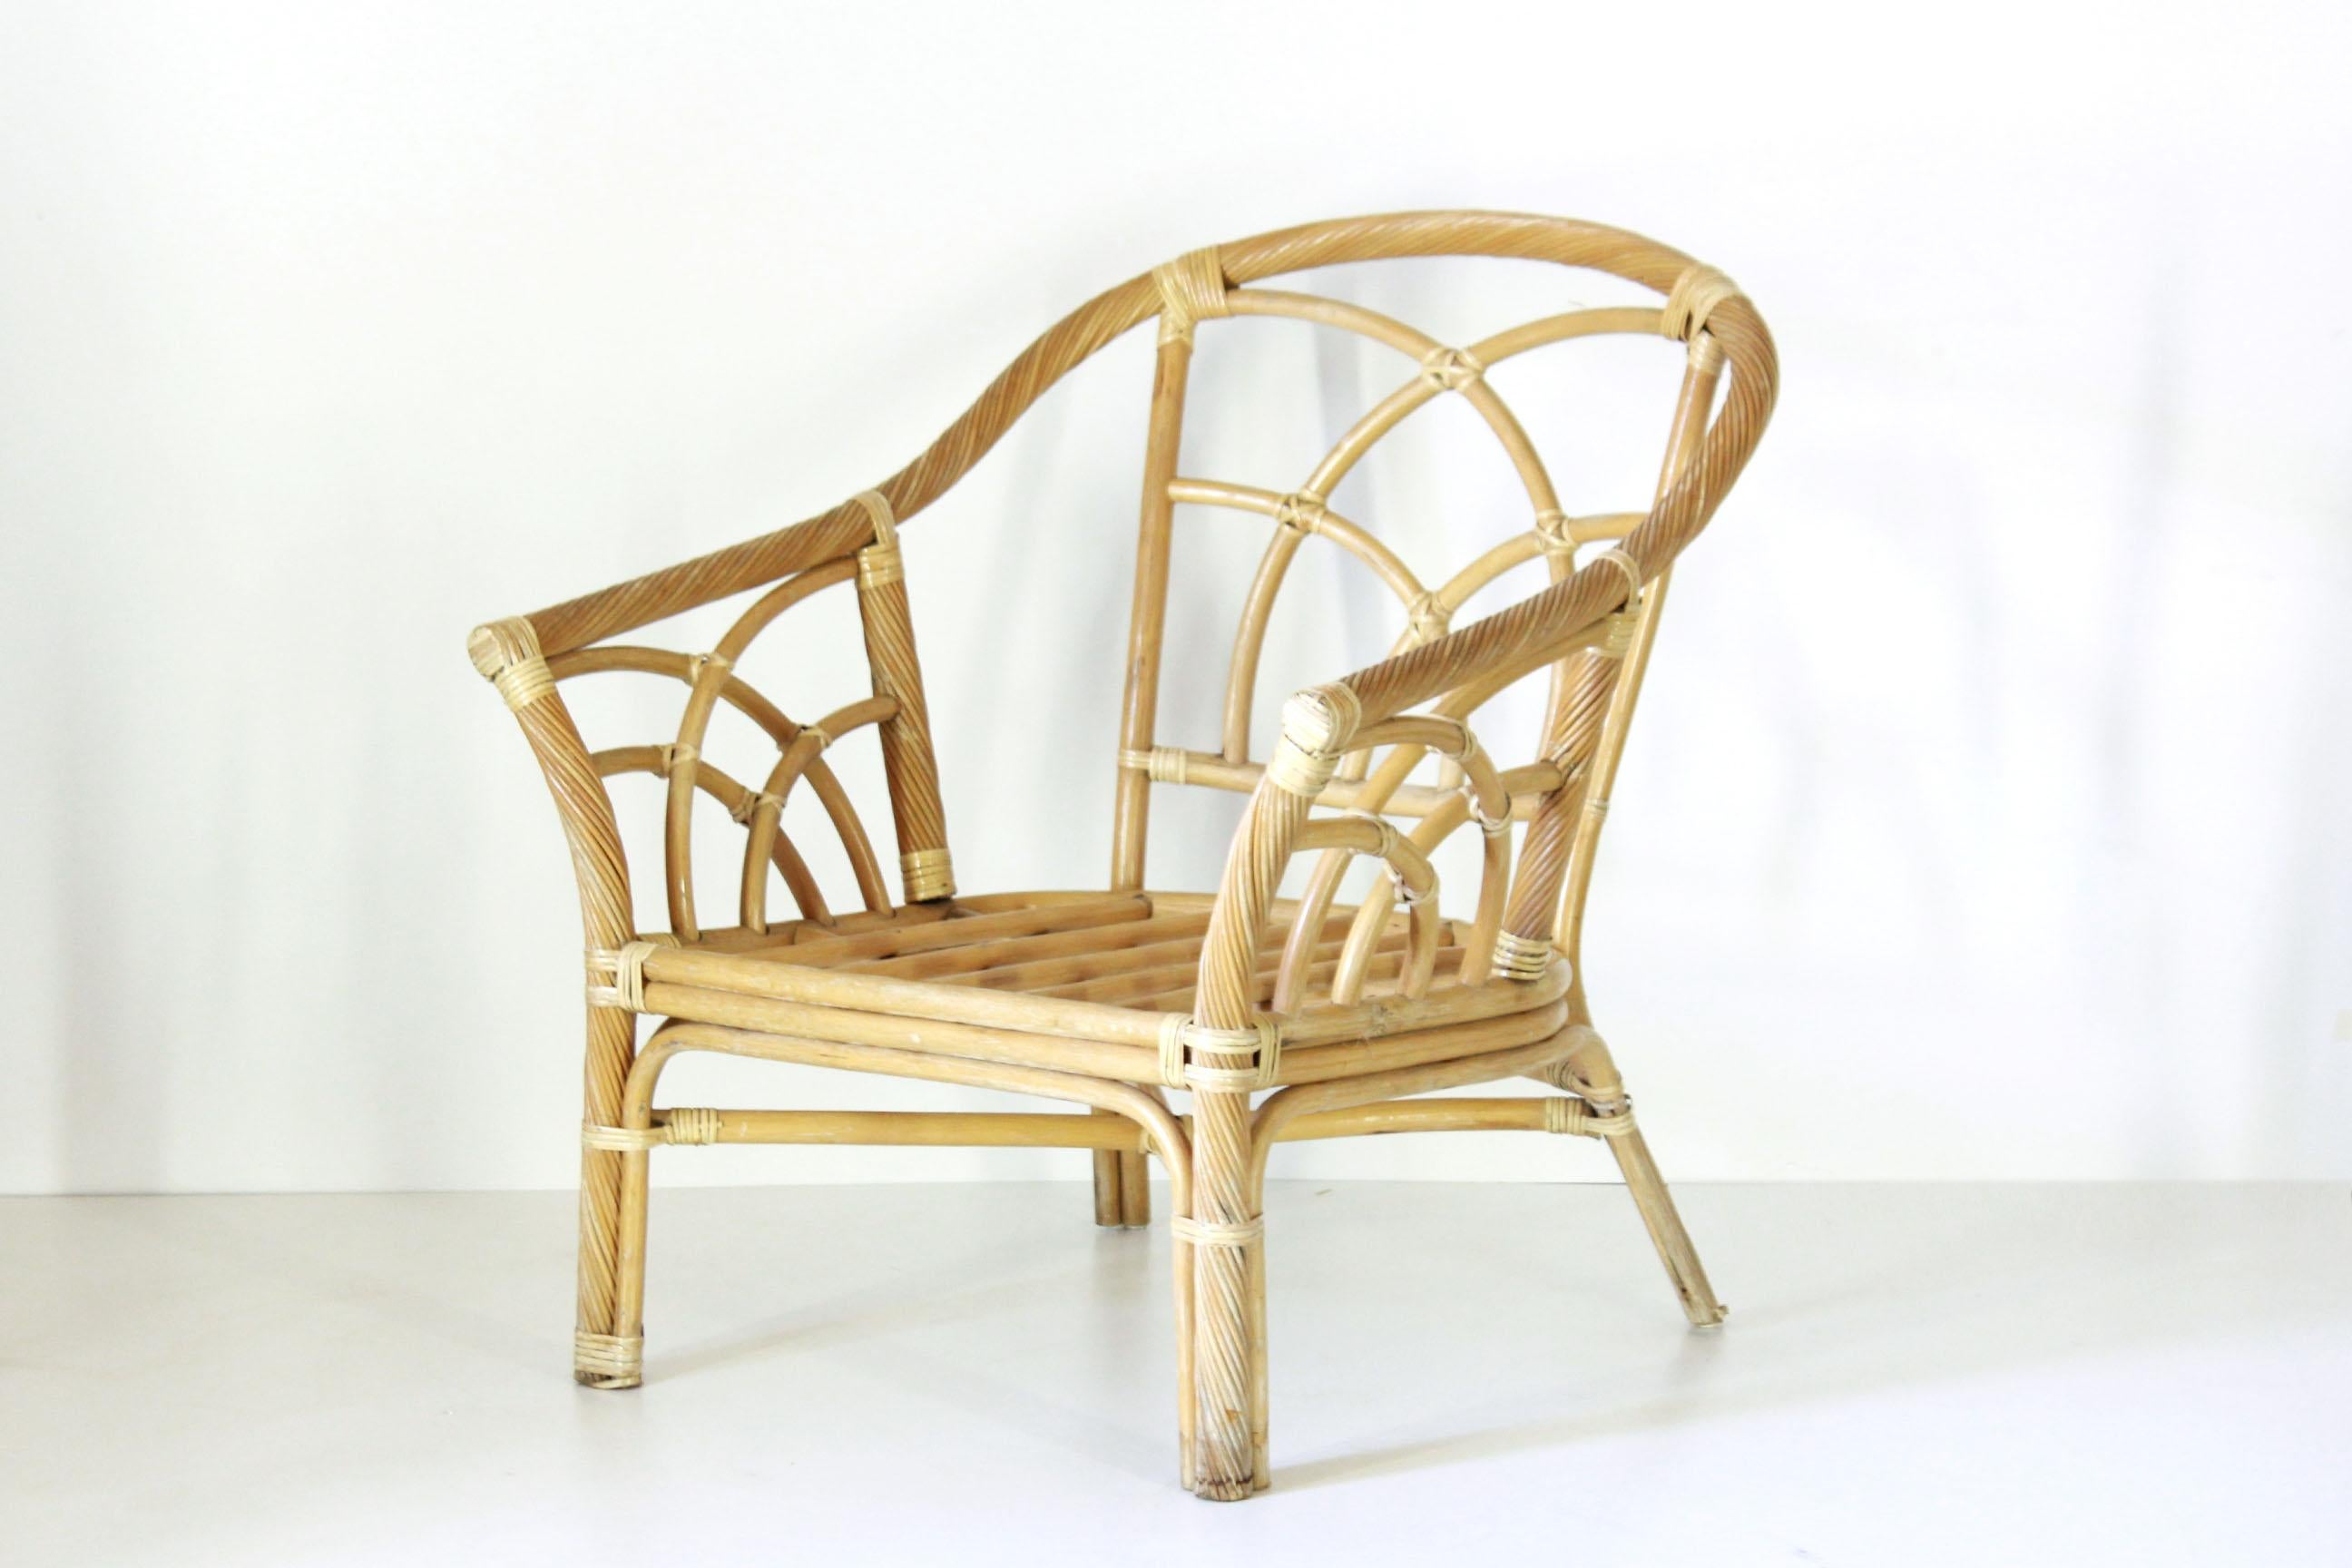 Spanish Colonial 1980s Bamboo Vintage Garden Armchair For Sale